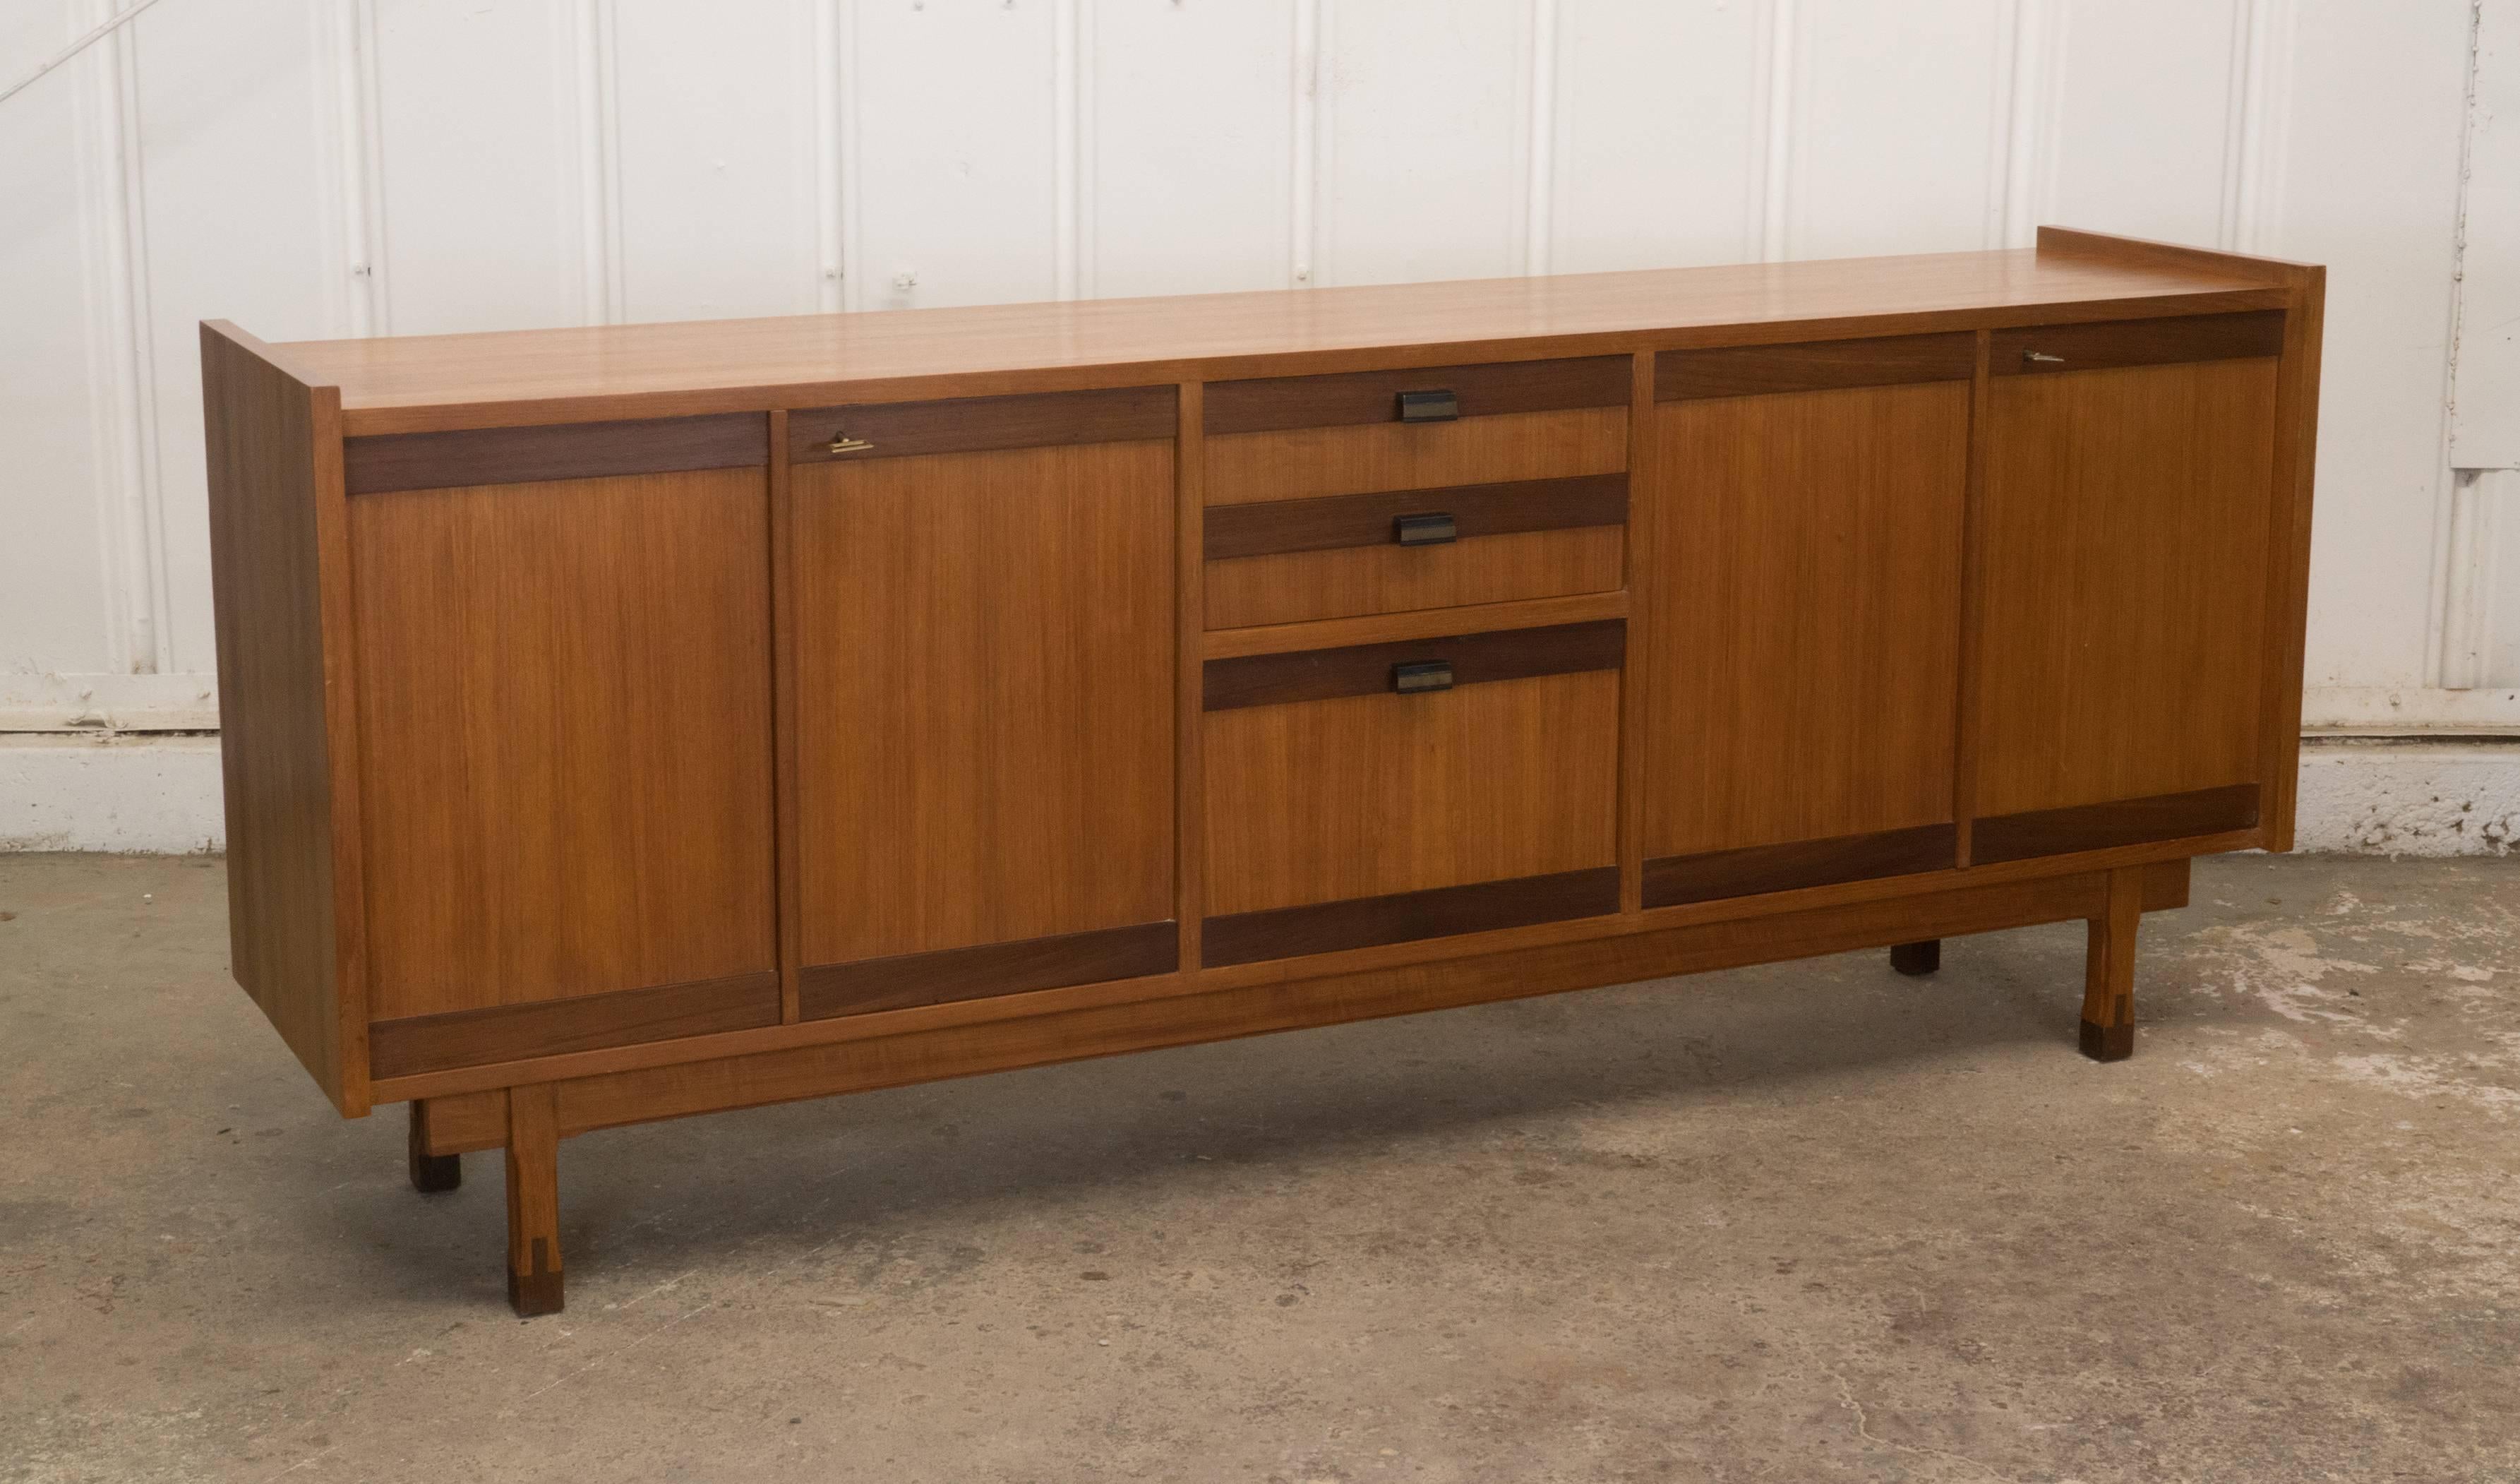 Vintage Danish teak credenza with functioning and chic key detail, interior shelves, and drop-down centre console.